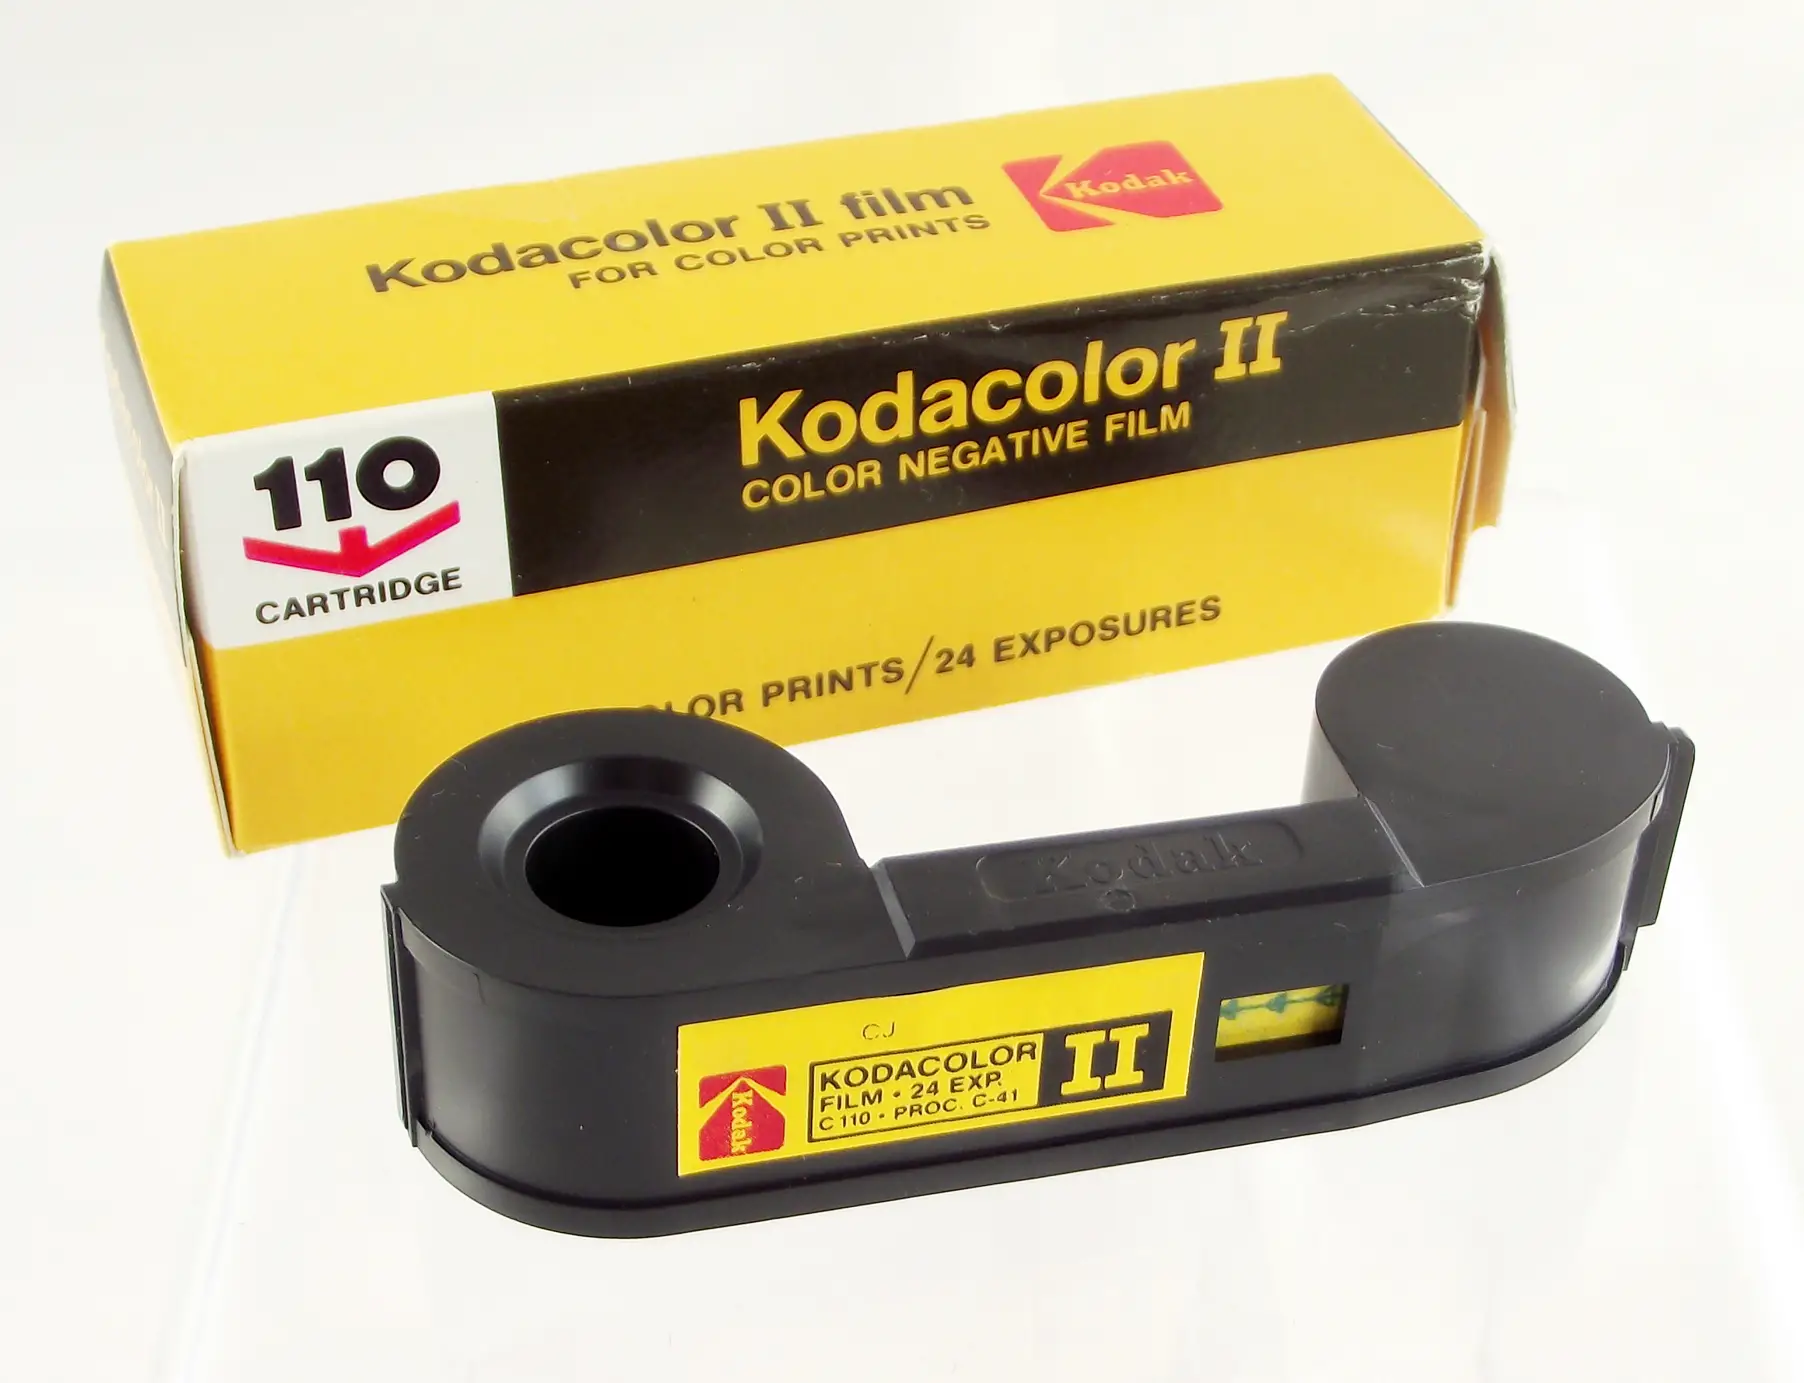 Where To Develop 110 Film and What’s The Cost?